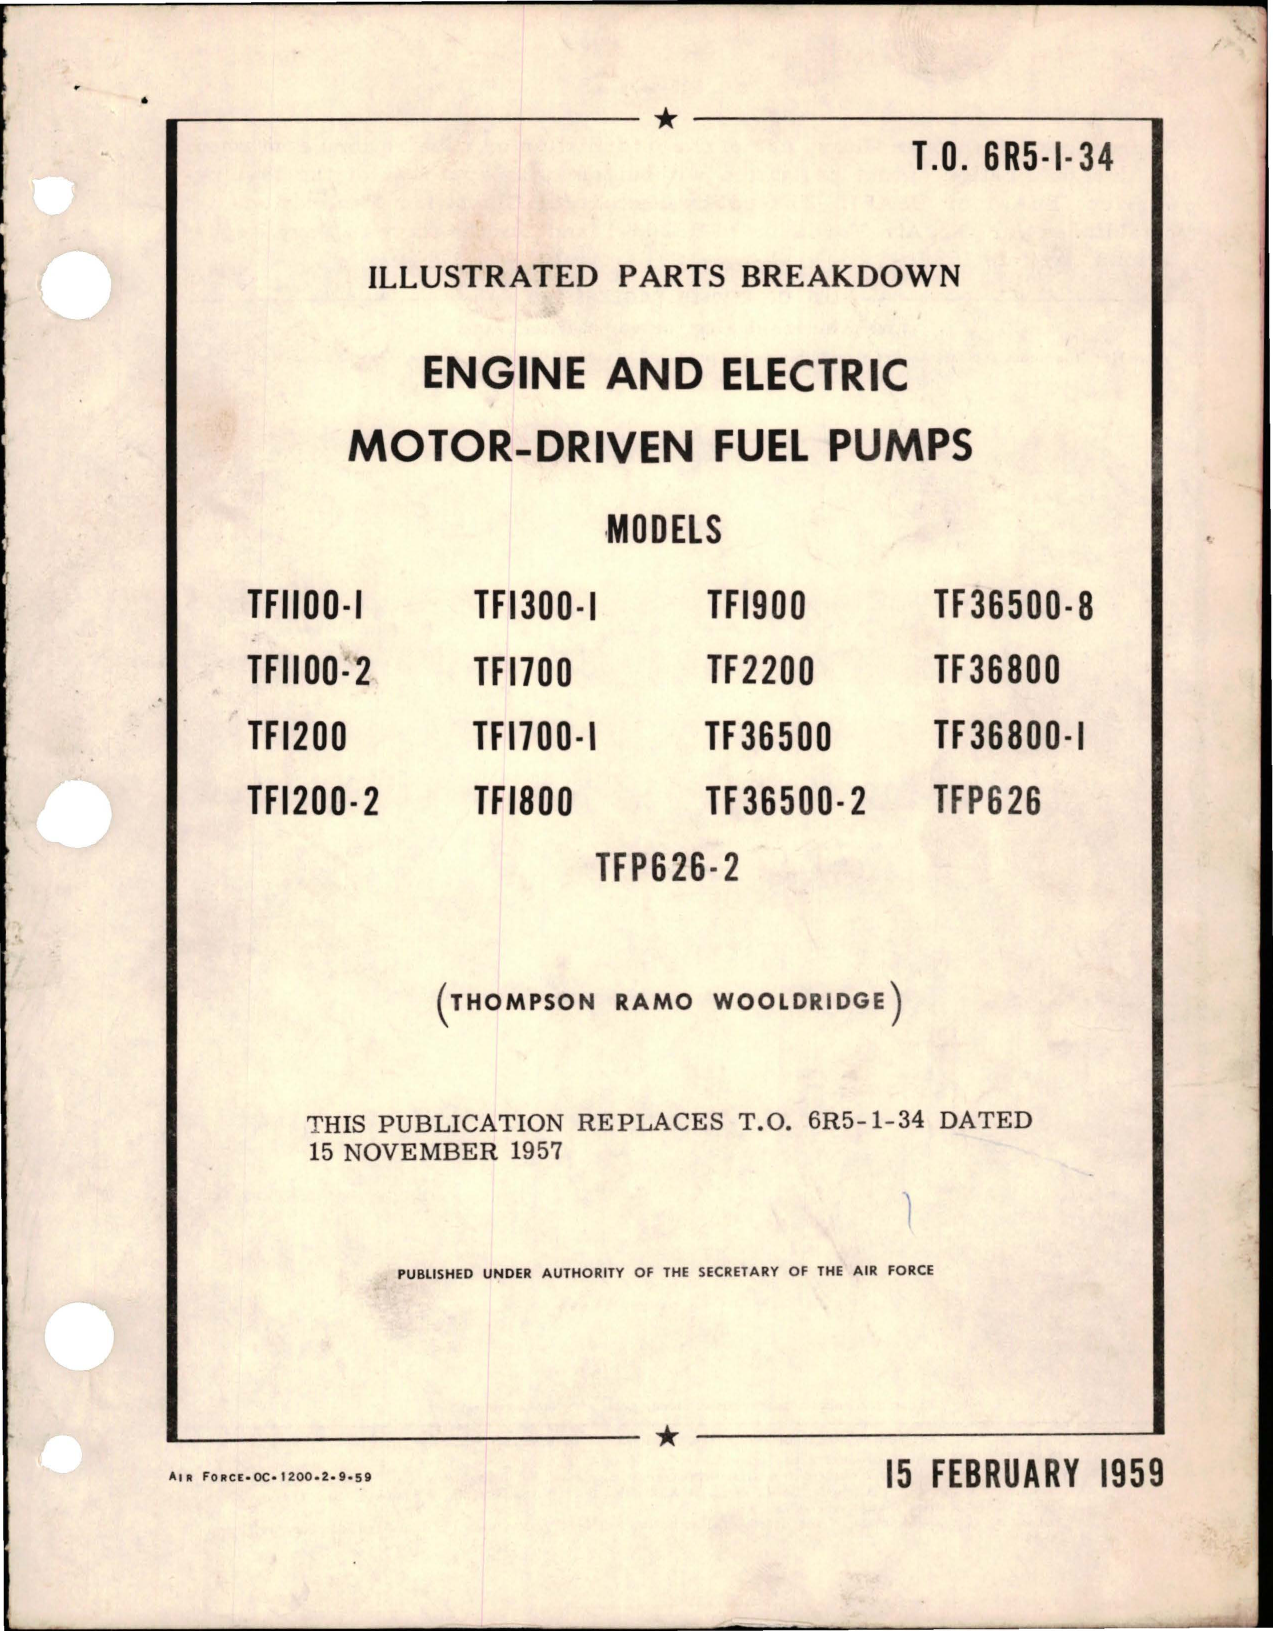 Sample page 1 from AirCorps Library document: Illustrated Parts Breakdown for Engine and Electric Motor Driven Fuel Pumps